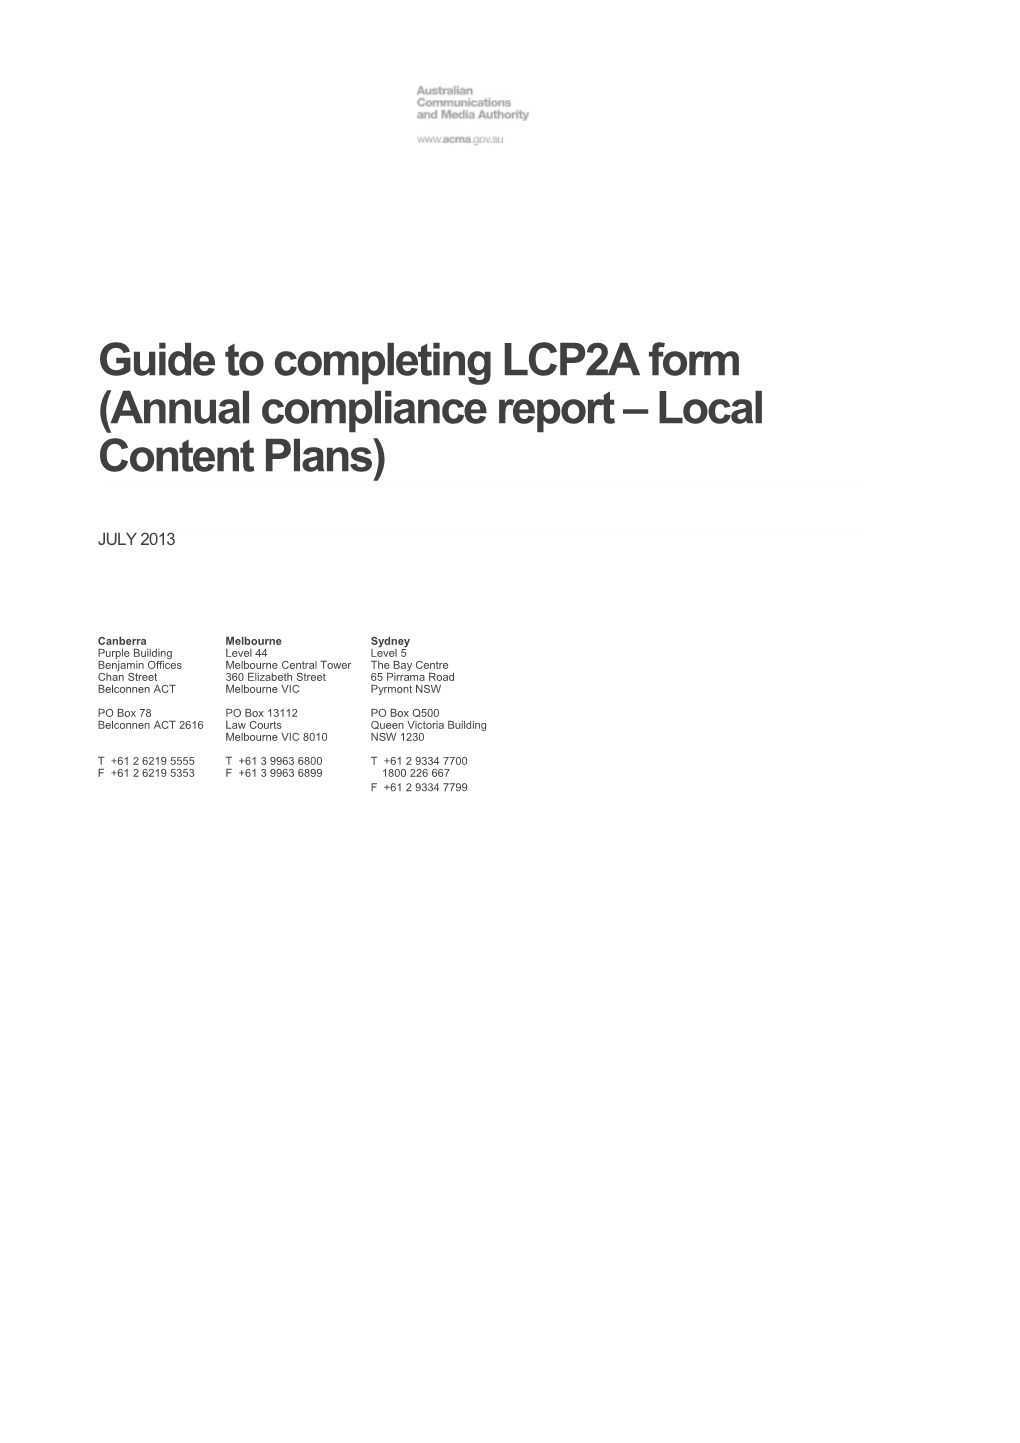 Guide to Completing LCP2A Form